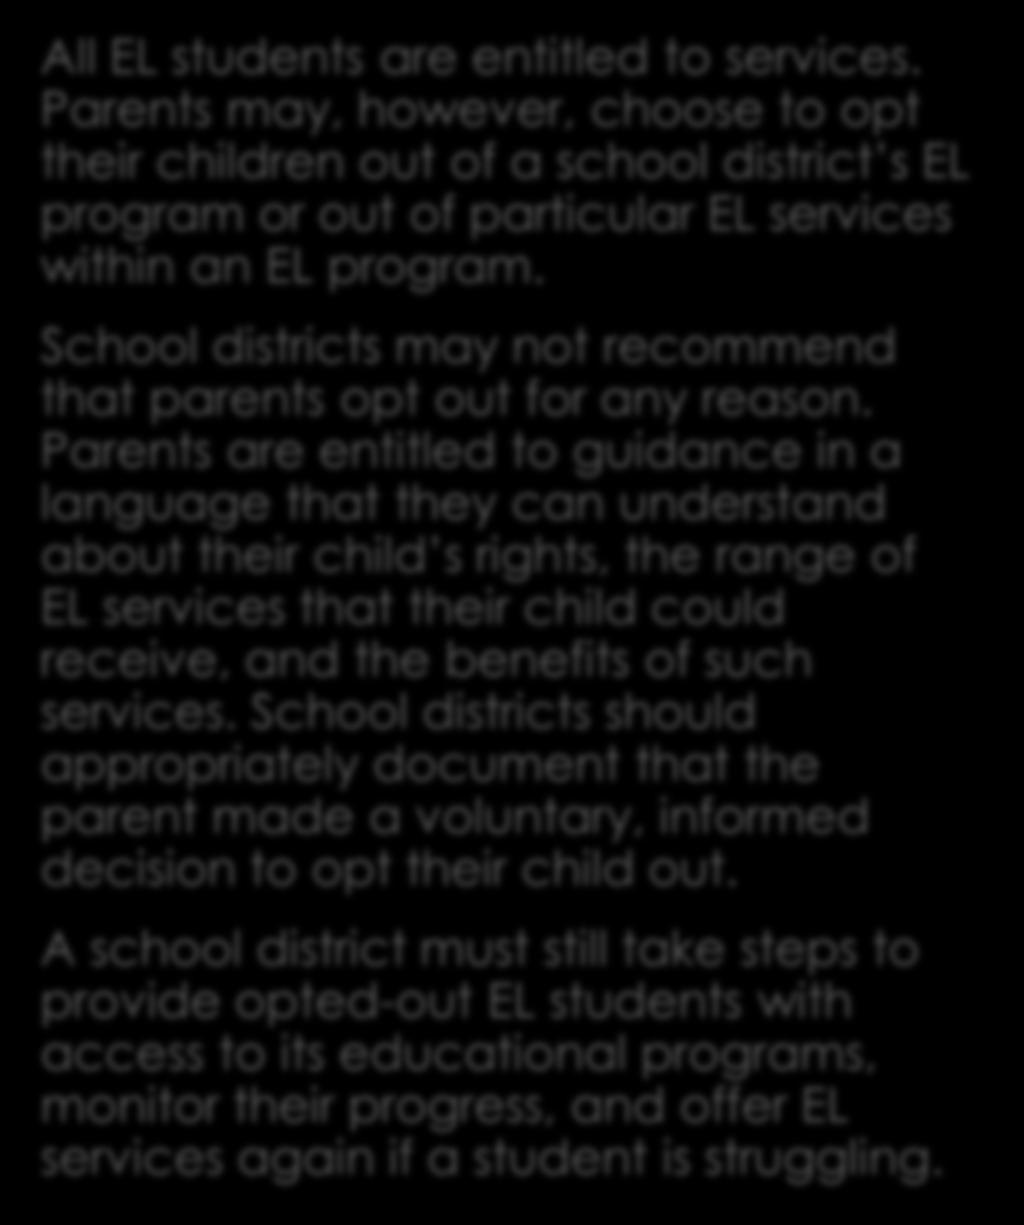 School districts may not recommend that parents opt out for any reason.